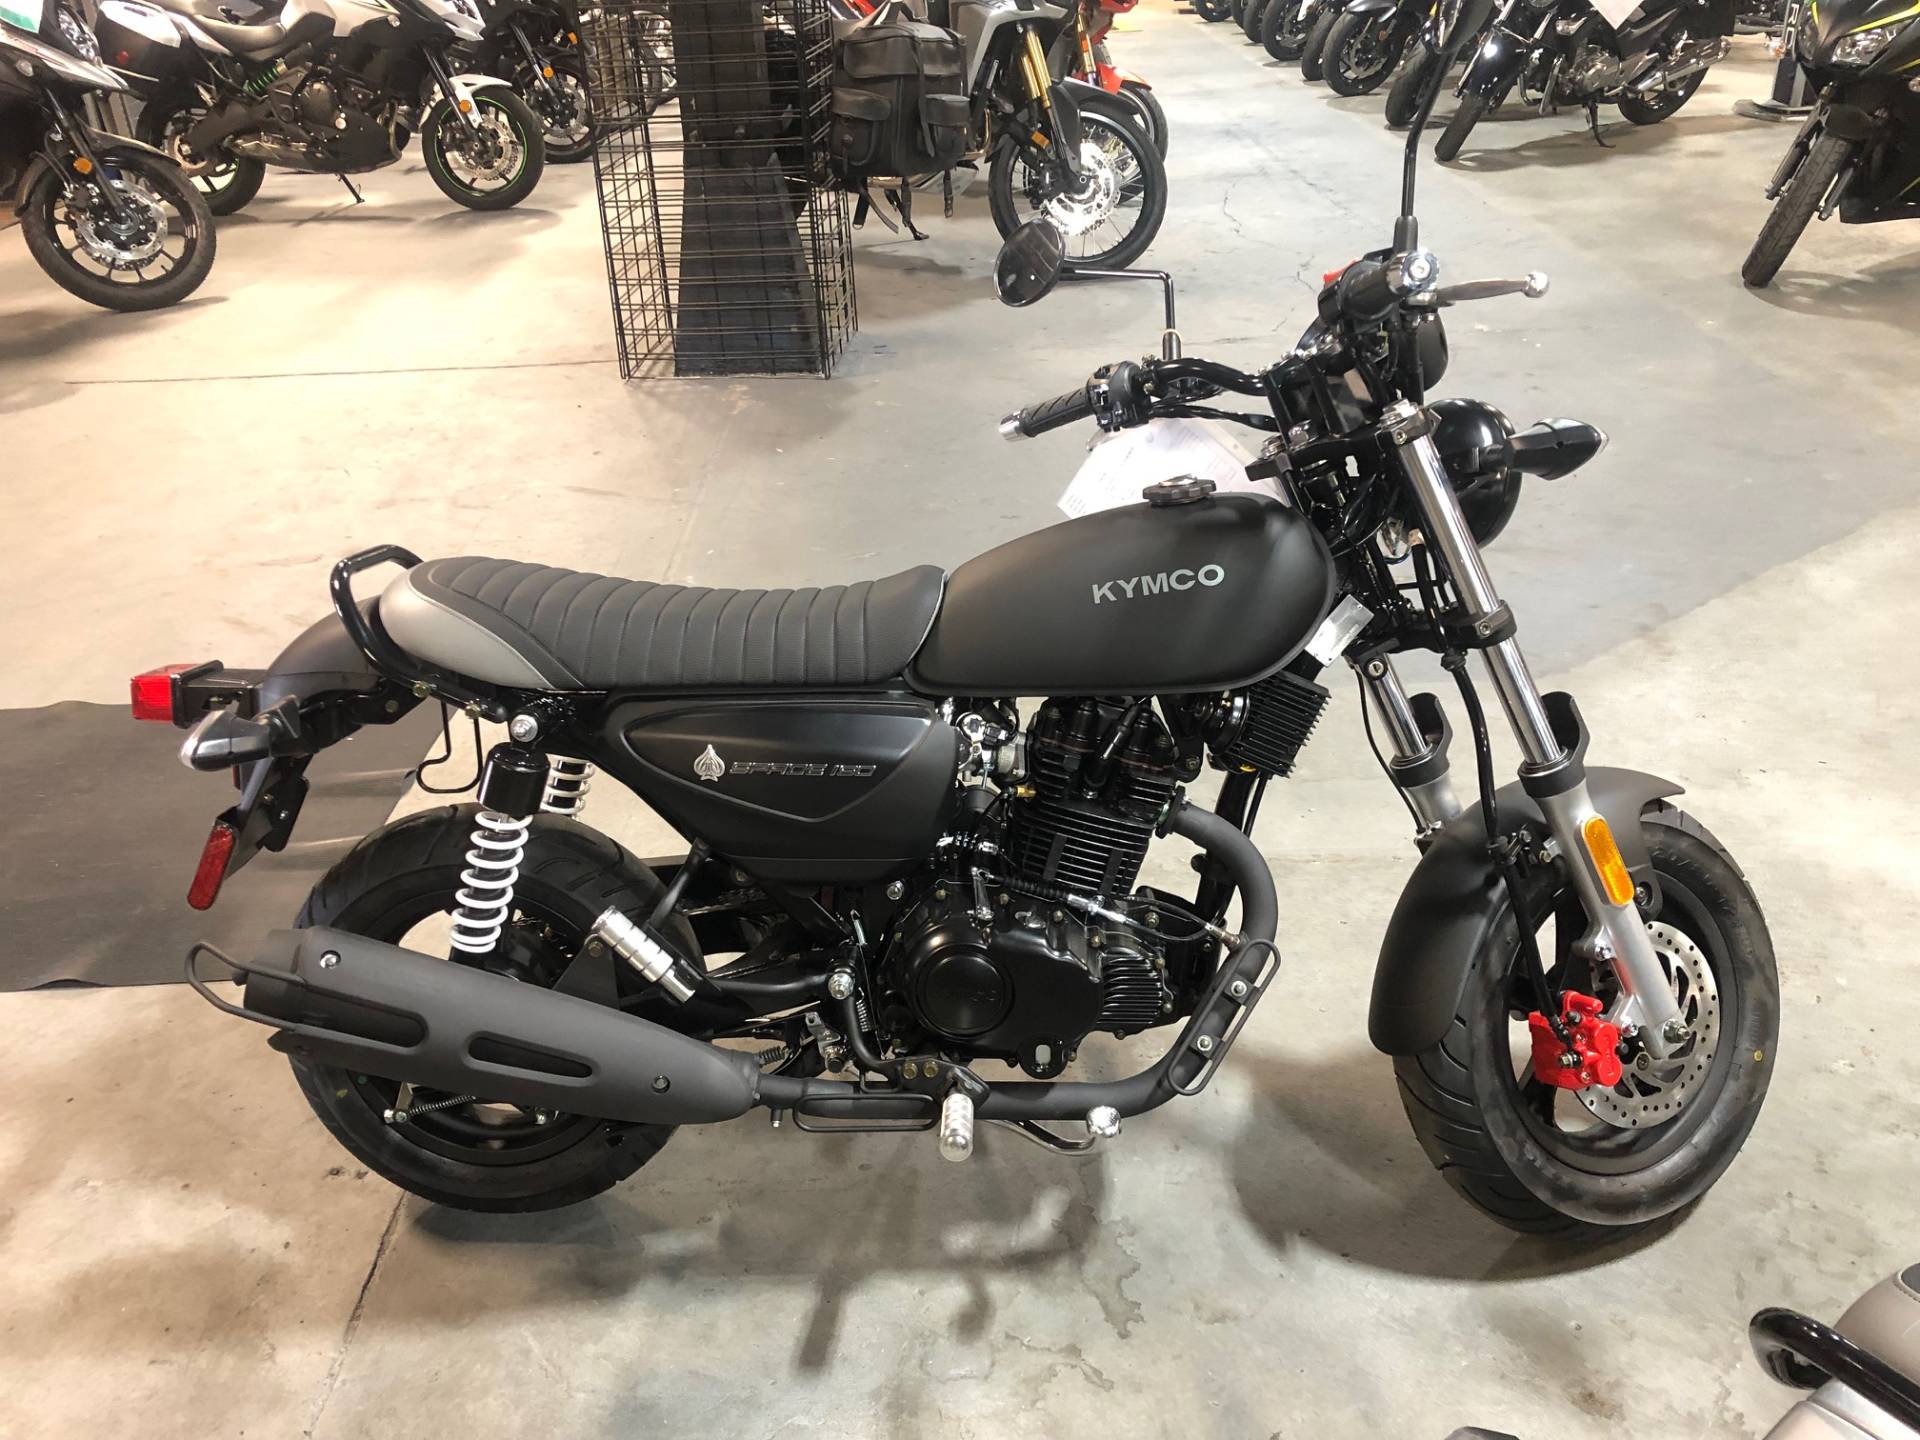 New 2019 Kymco Spade 150 Motorcycles in Kingsport, TN